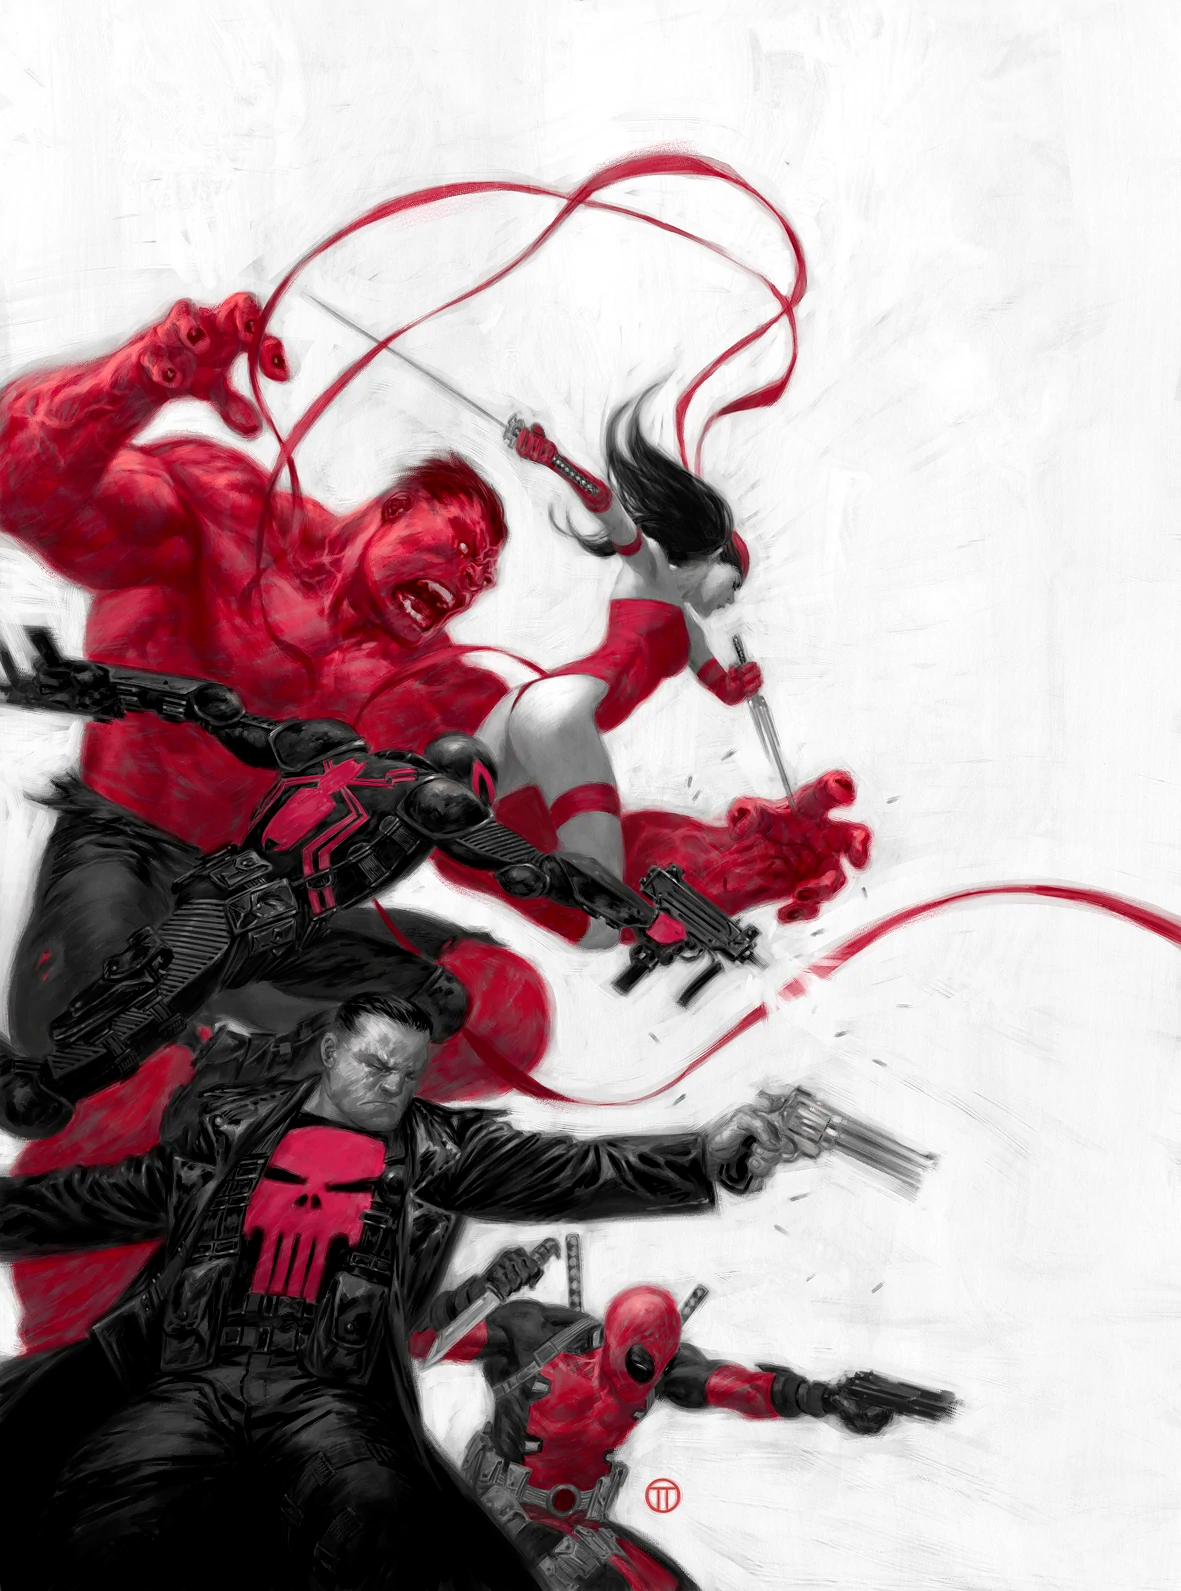 General Ross assembles a new incarnation of the titular team on Julian Tedesco's cover to Thunderbolts Vol. 2 #1 "Enlisted" (2012), Marvel Comics